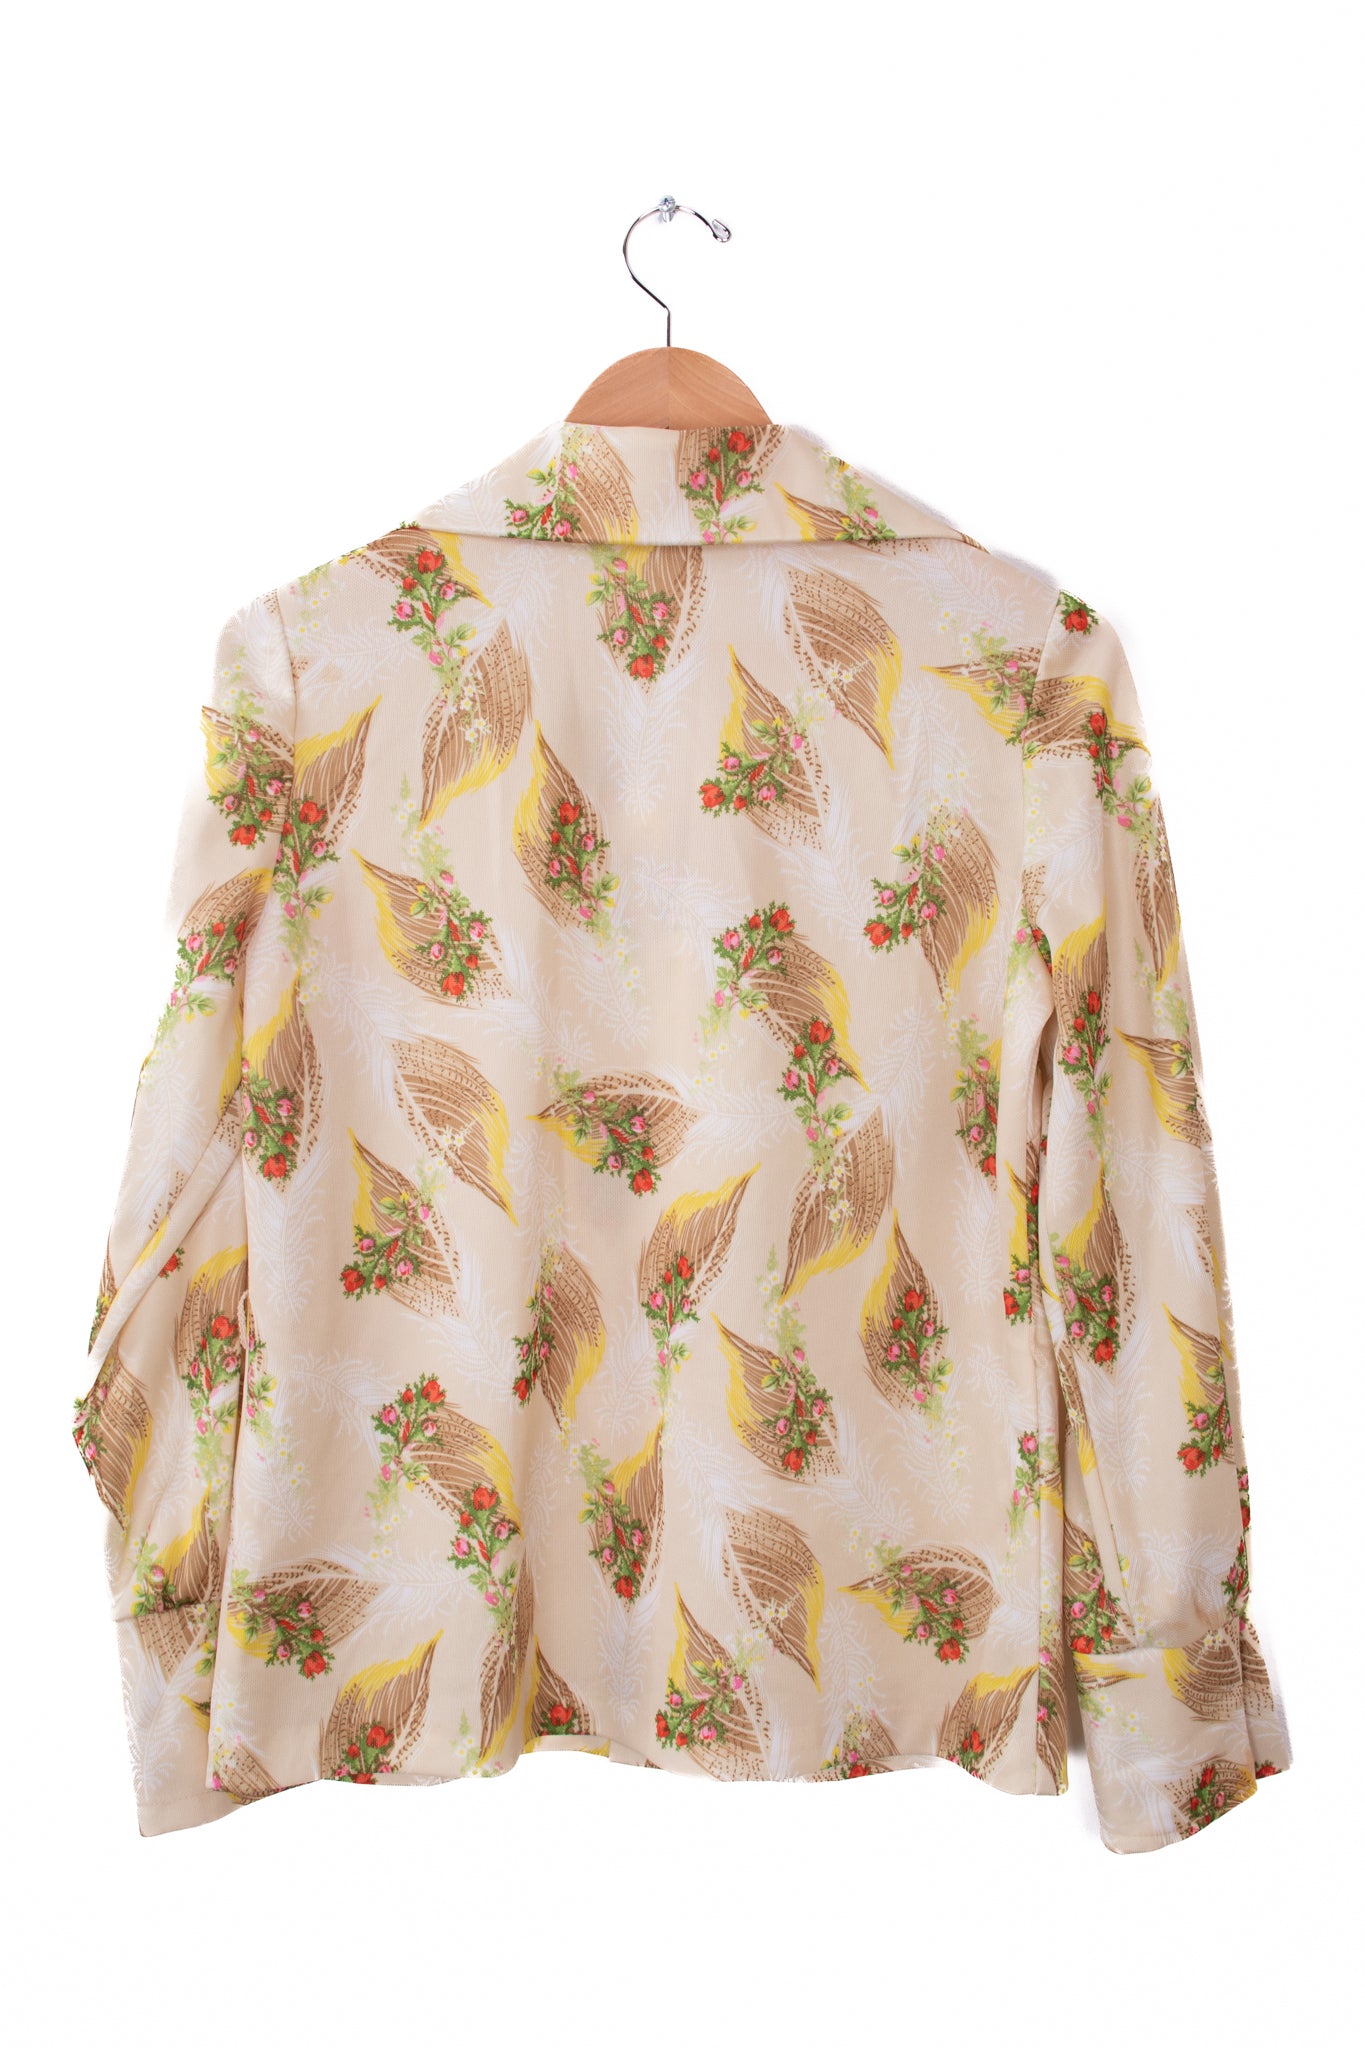 70s Sears Fashions Feathers and Flowers Poly Blouse